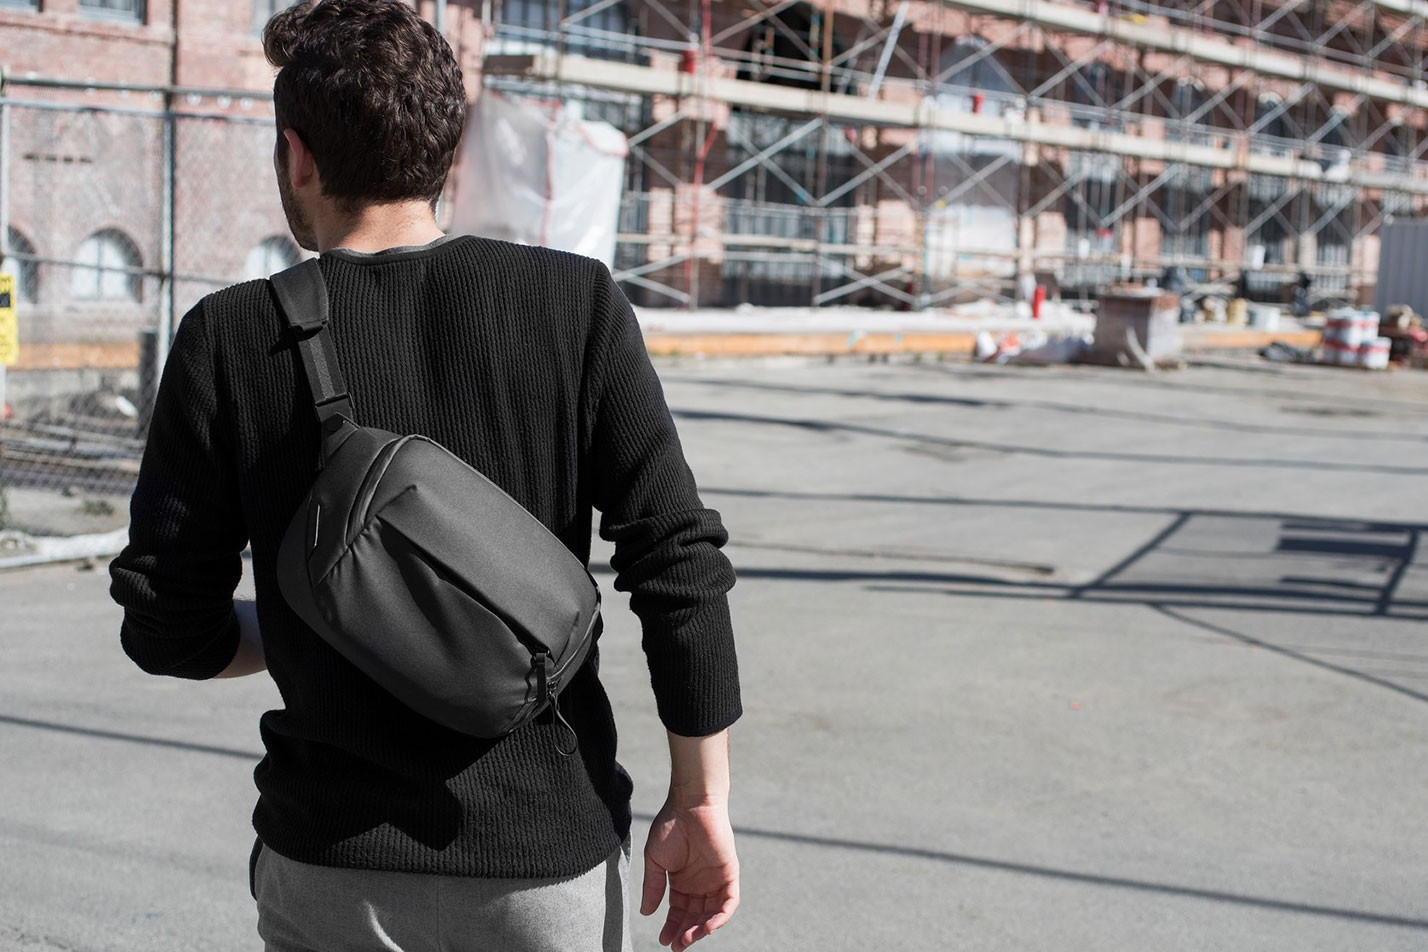 Meet the Peak Design Everyday Sling 5L, the Company's Smallest Bag Yet ...